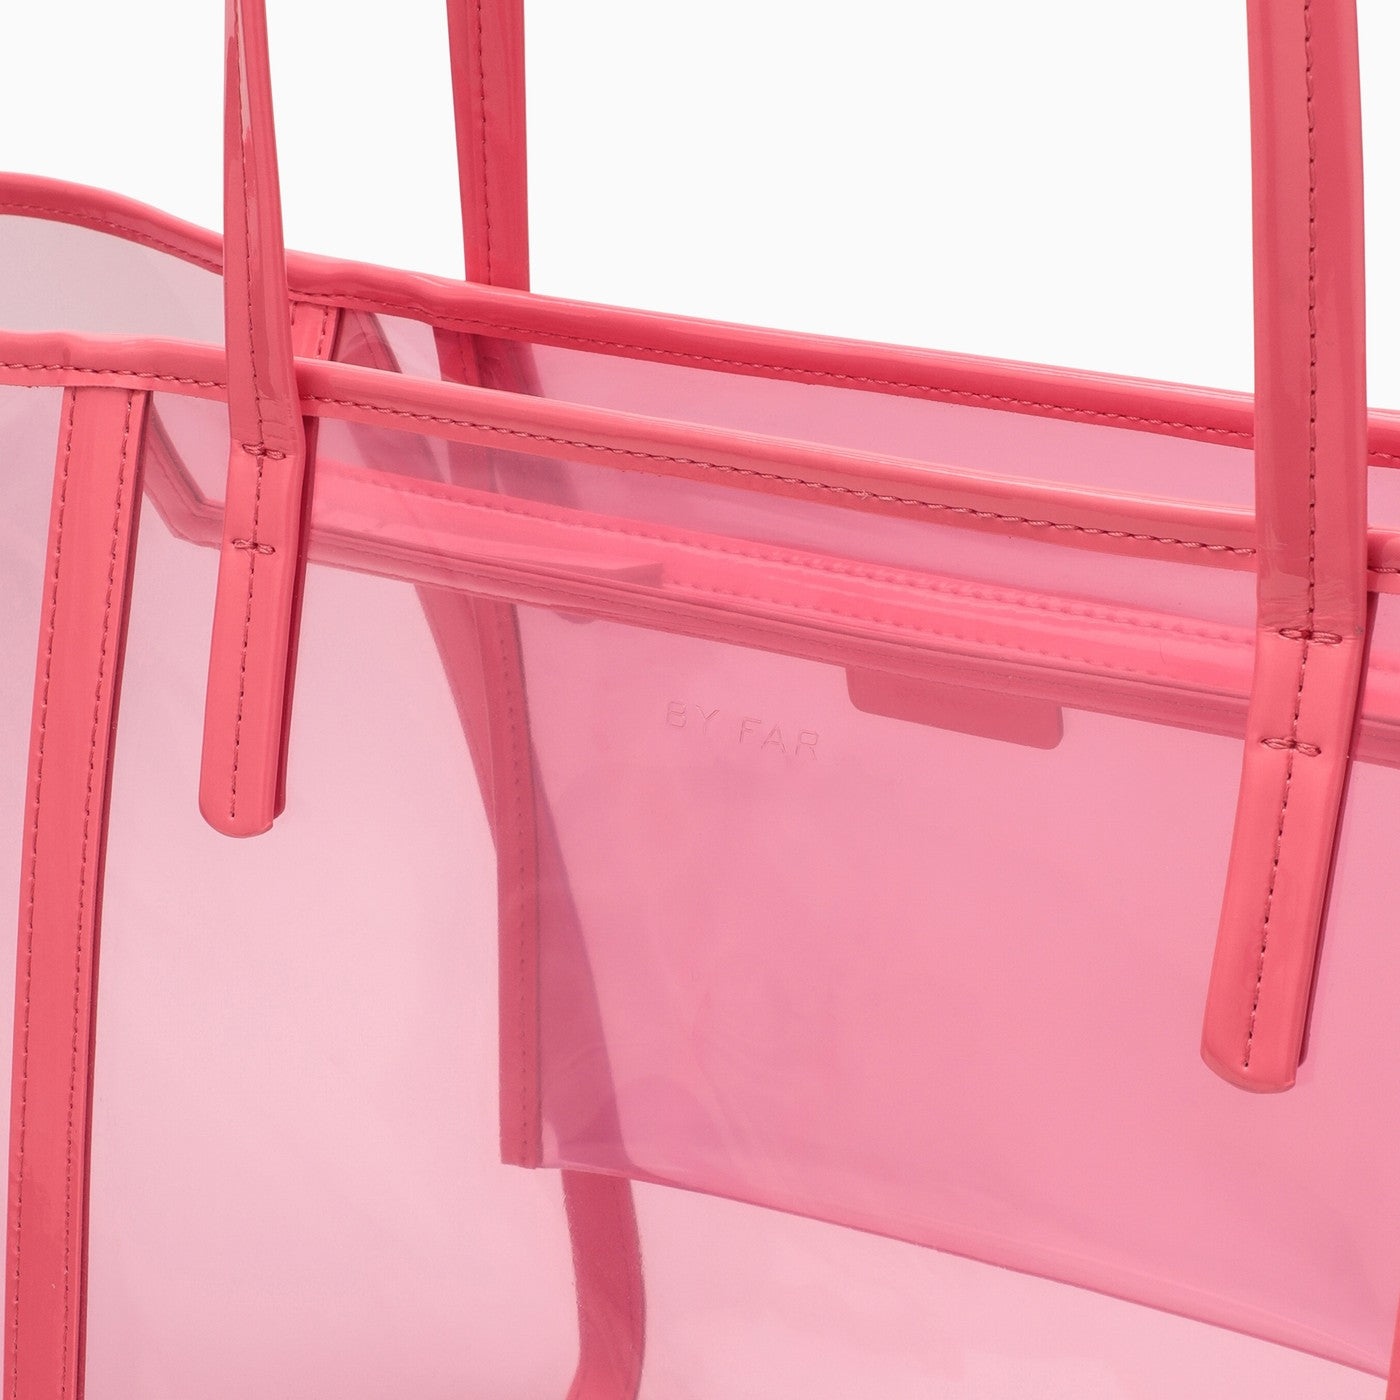 BY FAR - Club Translucent Tote Bag in Pink By Far